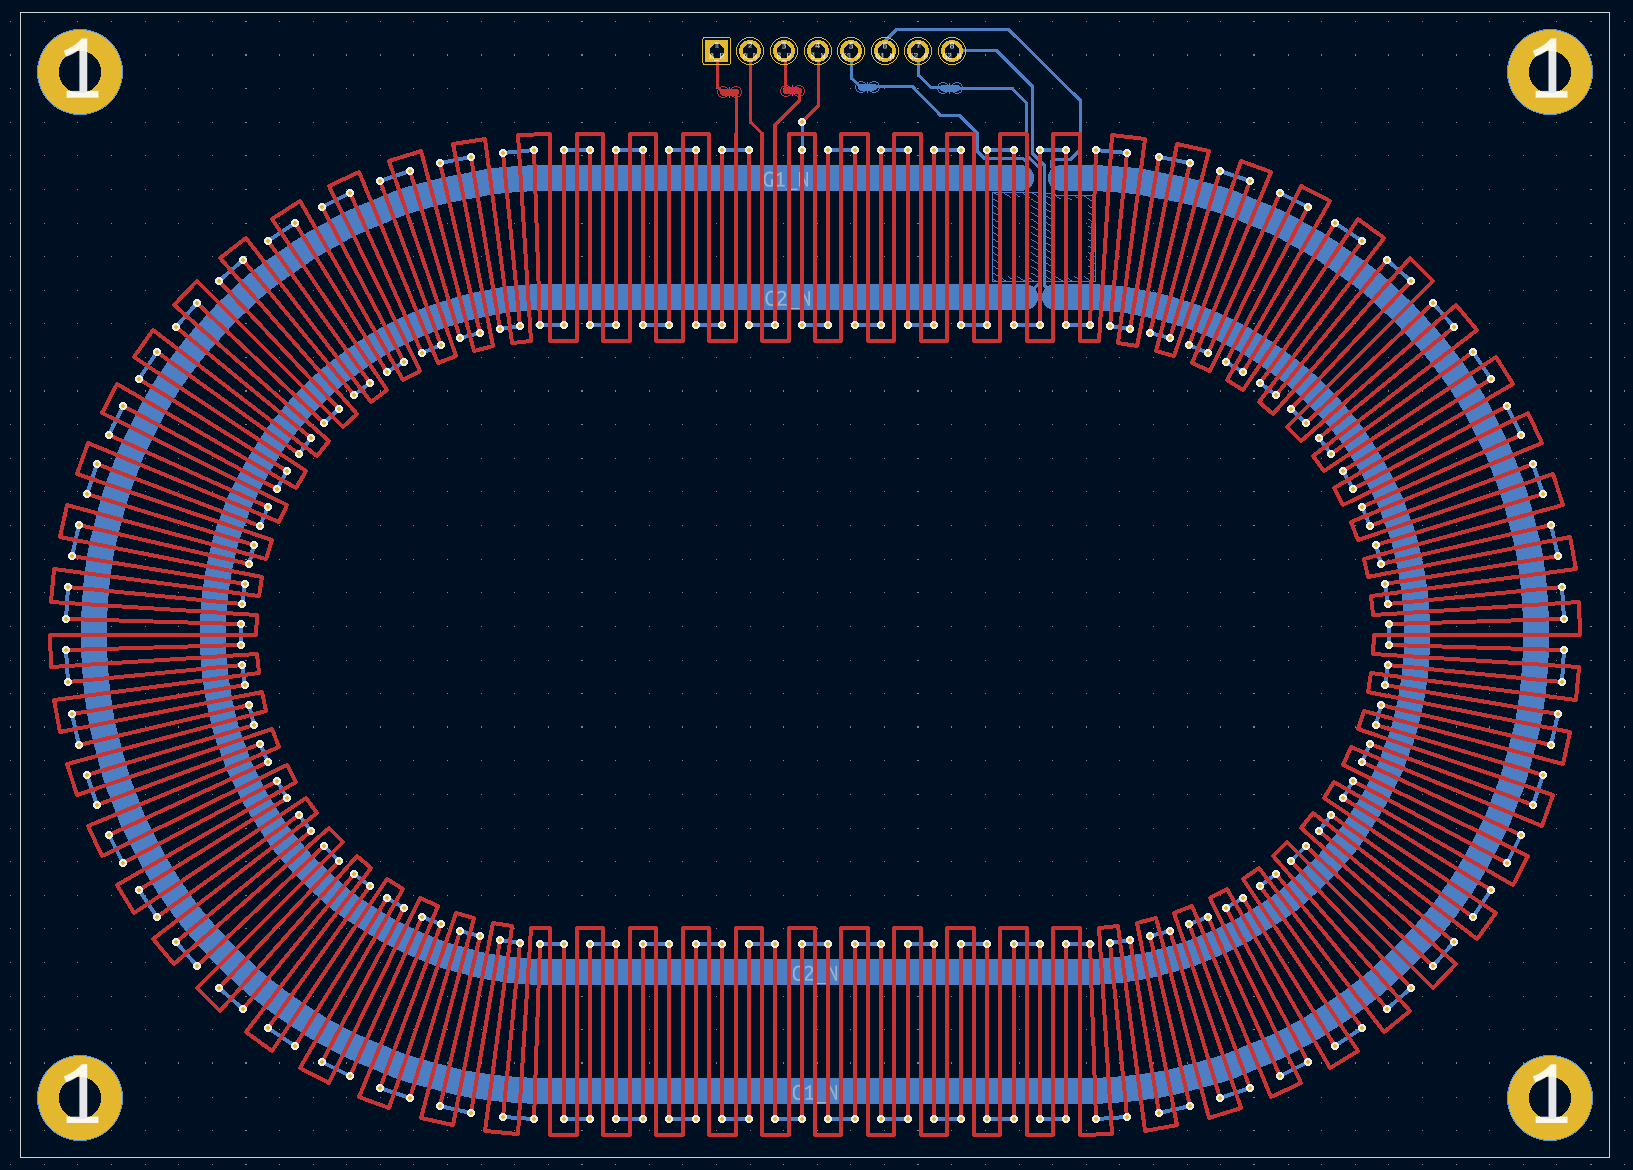 Example of a generated racetrack design